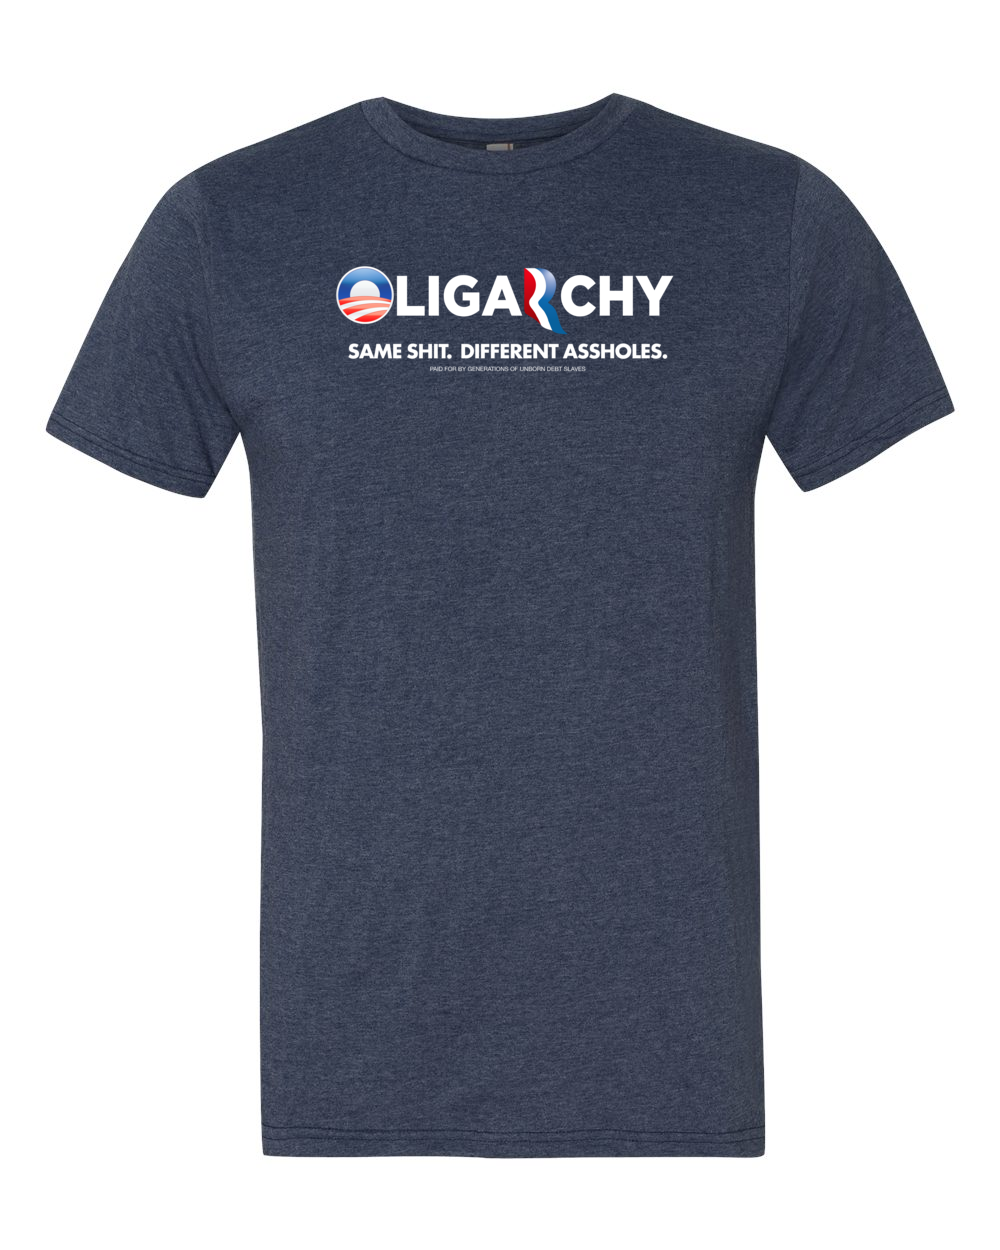 Oligarchy Same Shit Different Assholes Shirt